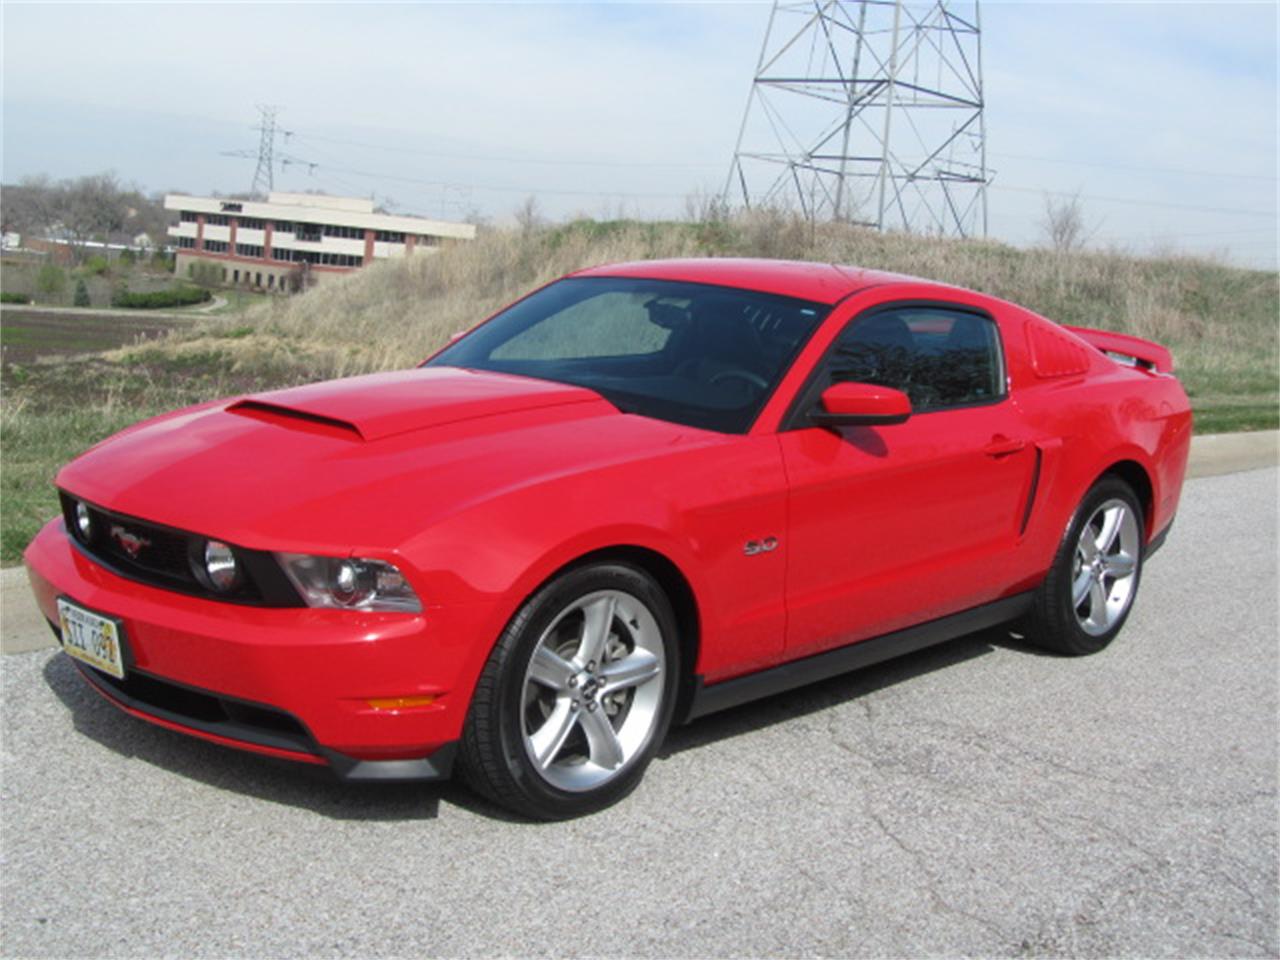 Red Candy 2012 Ford Mustang